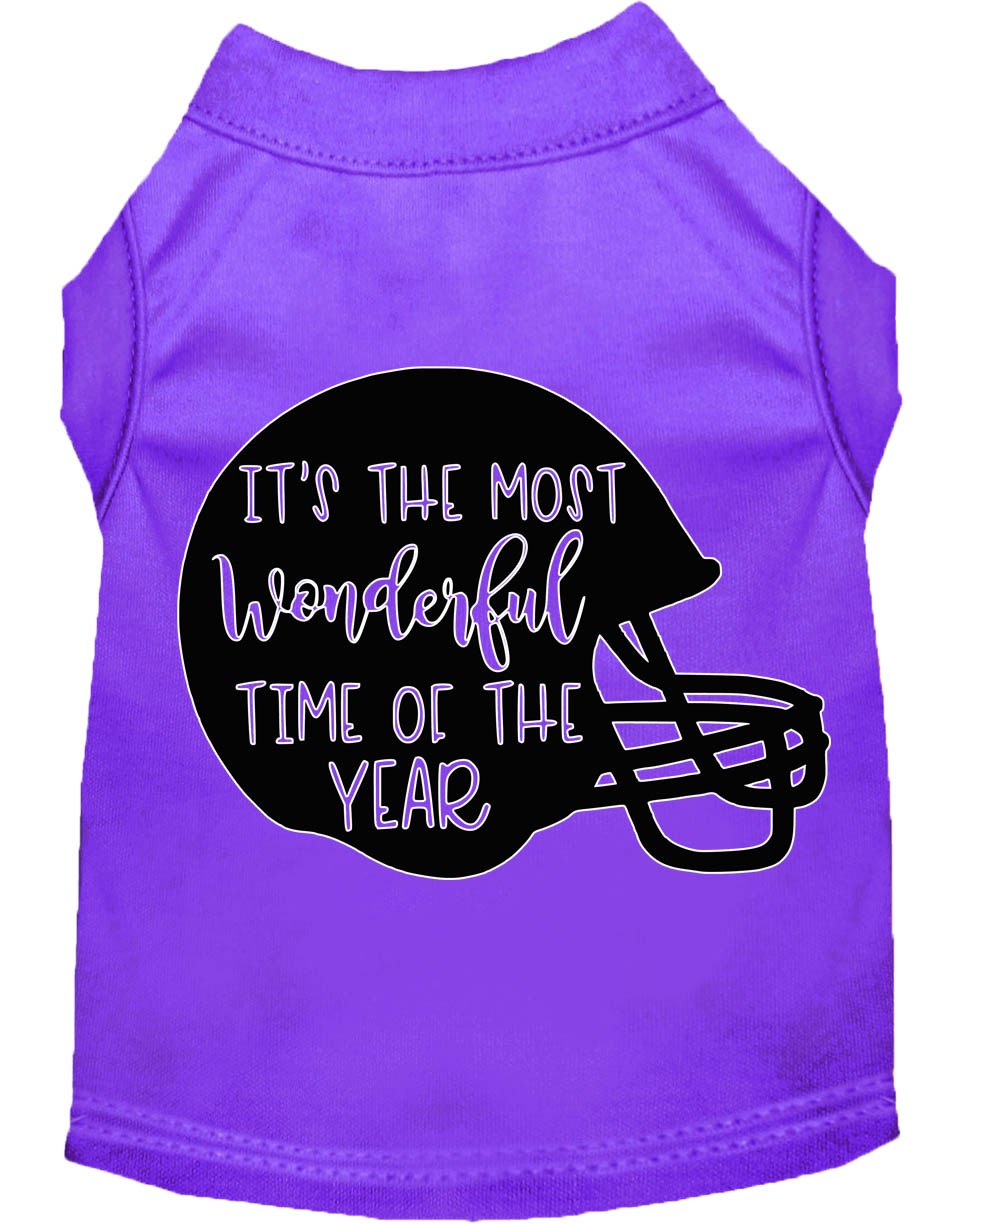 Most Wonderful Time of the Year (Football) Screen Print Dog Shirt Purple Med